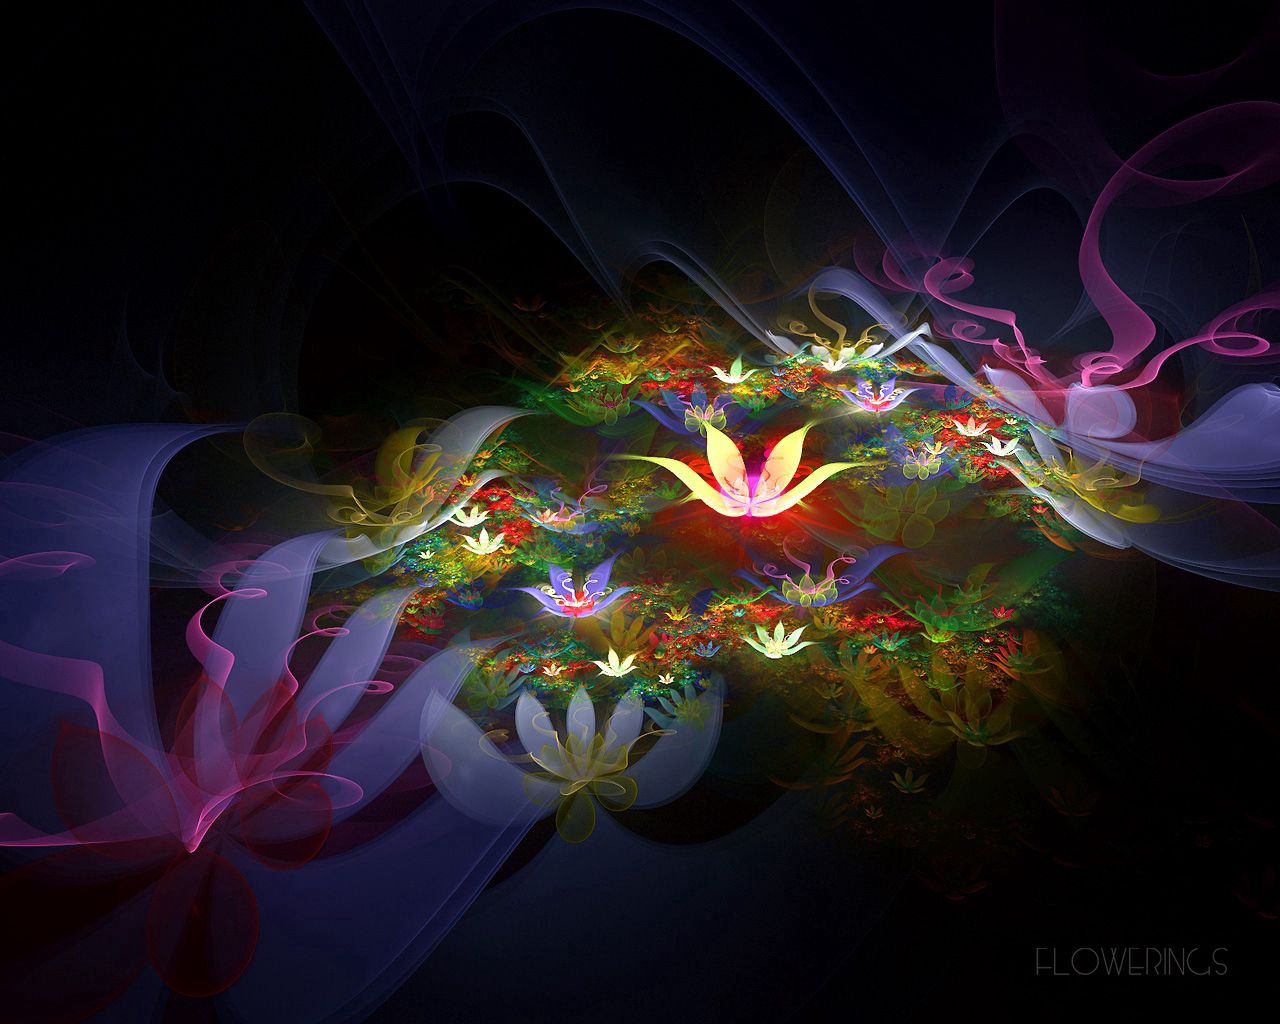 UHD wallpaper shroud, space, abstract, flowers